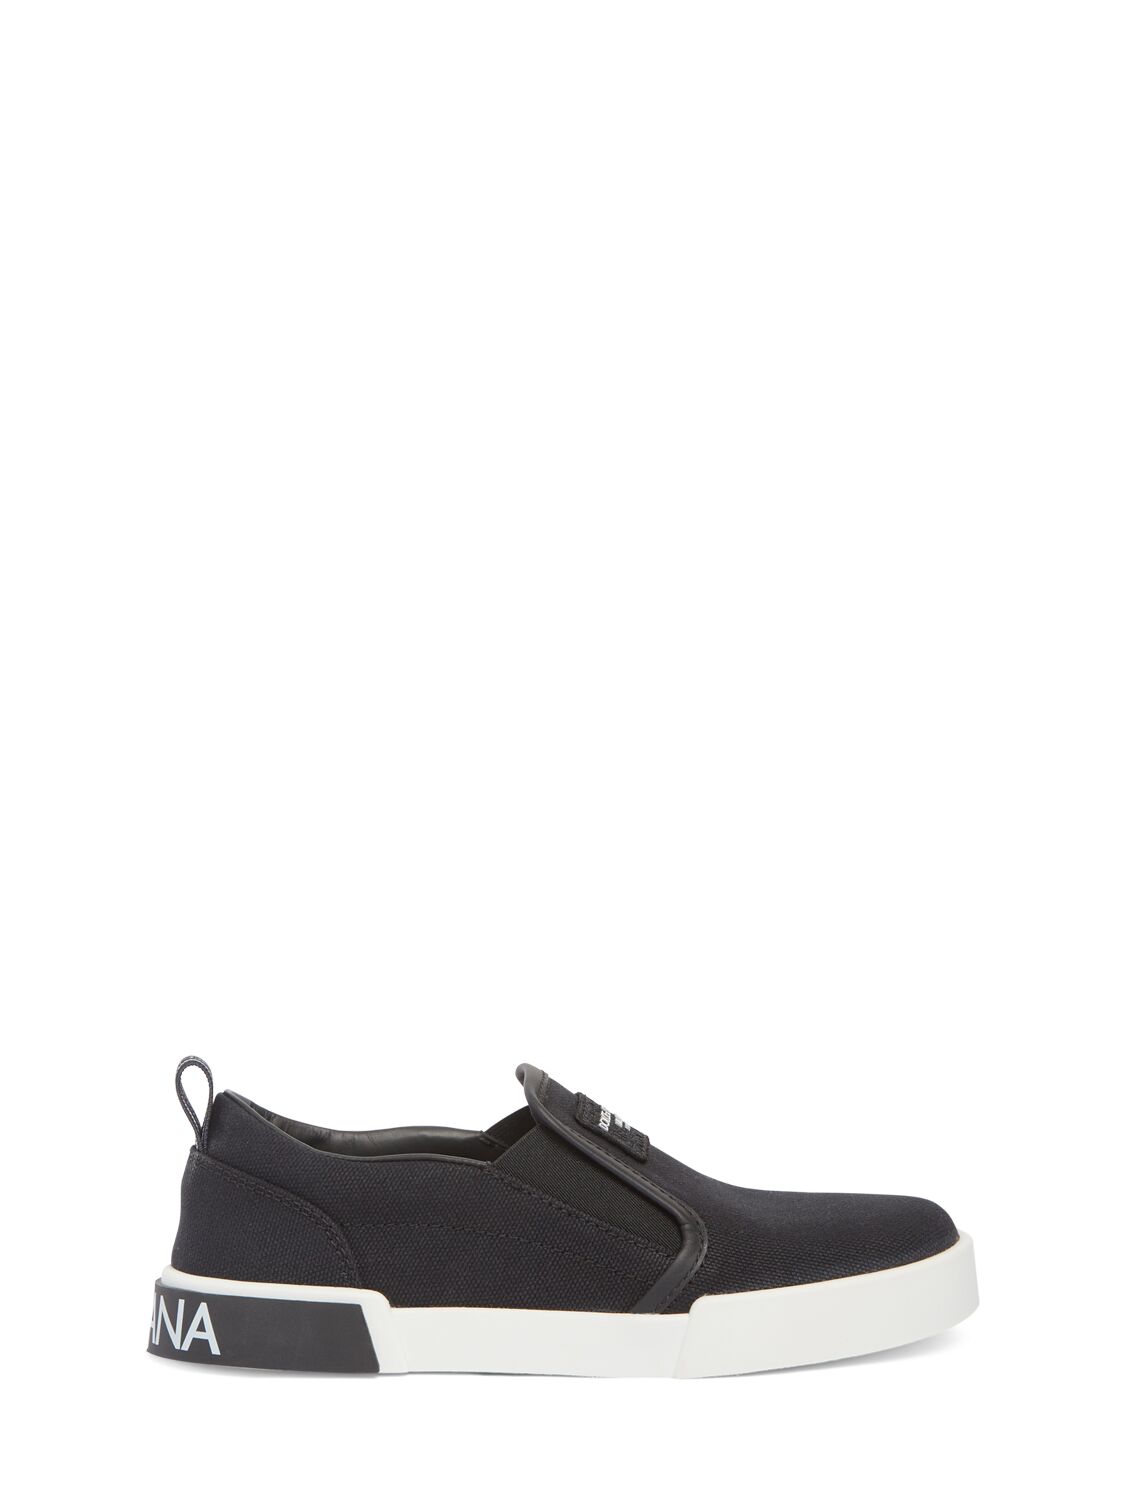 Dolce & Gabbana Kids' Canvas & Leather Slip-on Sneakers In Black